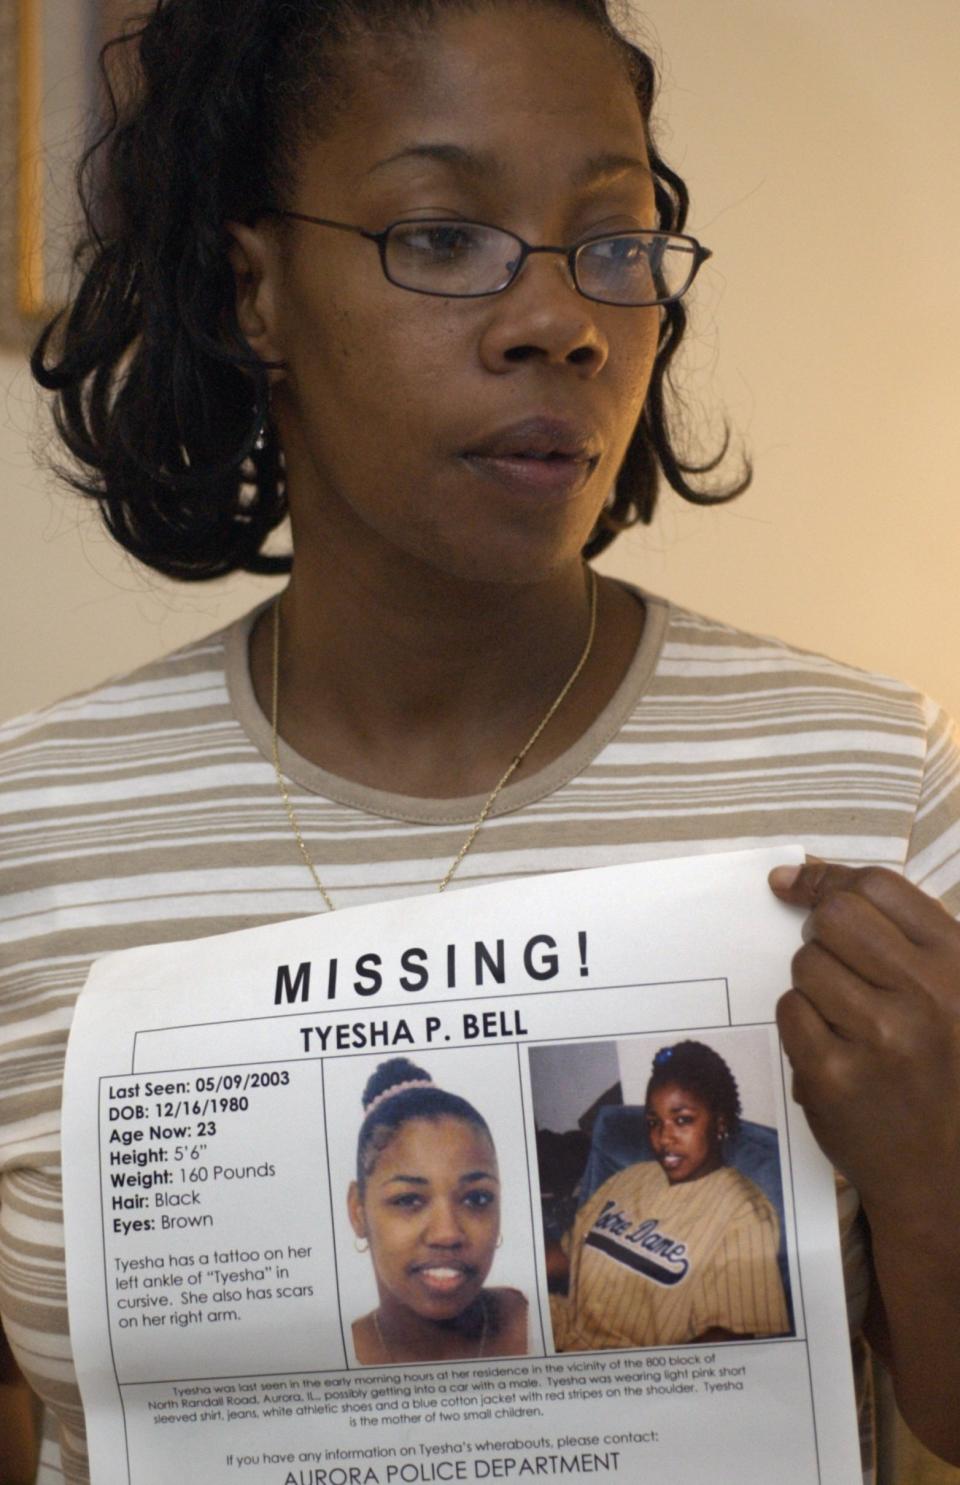 FILE - In this May 6, 2004 photo, Lorna Smith holds a poster of her daughter Tyesha Bell, who has been missing in Glendale Heights, Ill. Authorities say human remains found last year in a wooded area of Chicago’s western suburbs have been identified as Bell, an Aurora mother reported missing in 2003. Aurora Police said Tuesday, March 16, 2021, that Illinois State Police’s crime lab identified Tyesha Bell’s remains through DNA analysis. (Terry Harris/Chicago Tribune via AP)